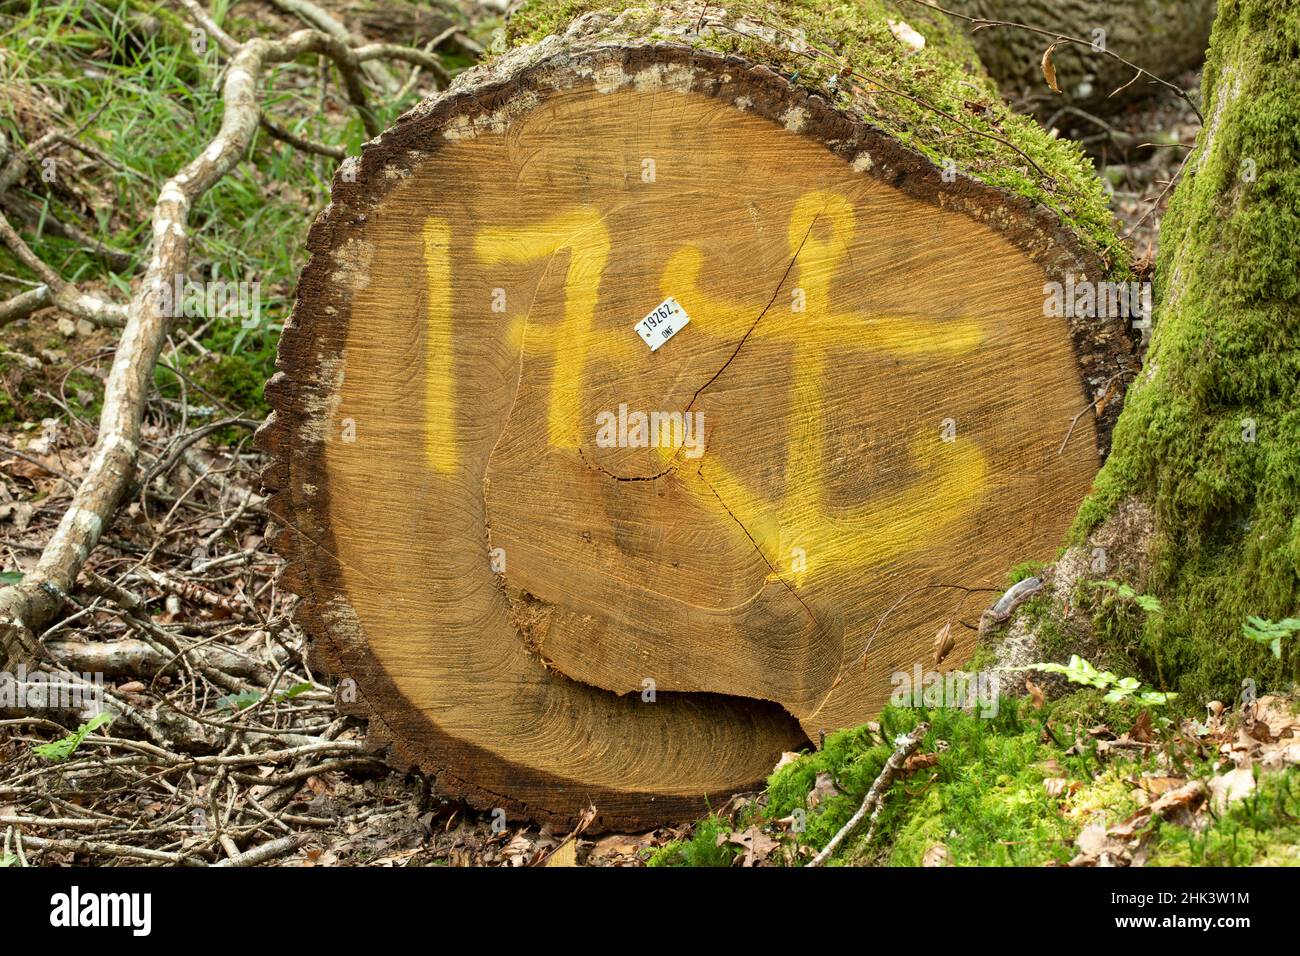 Common oak (Quercus robur) marked with an anchor for shipbuilding, Cranou forest, Hanvec, Finistere, France Stock Photo